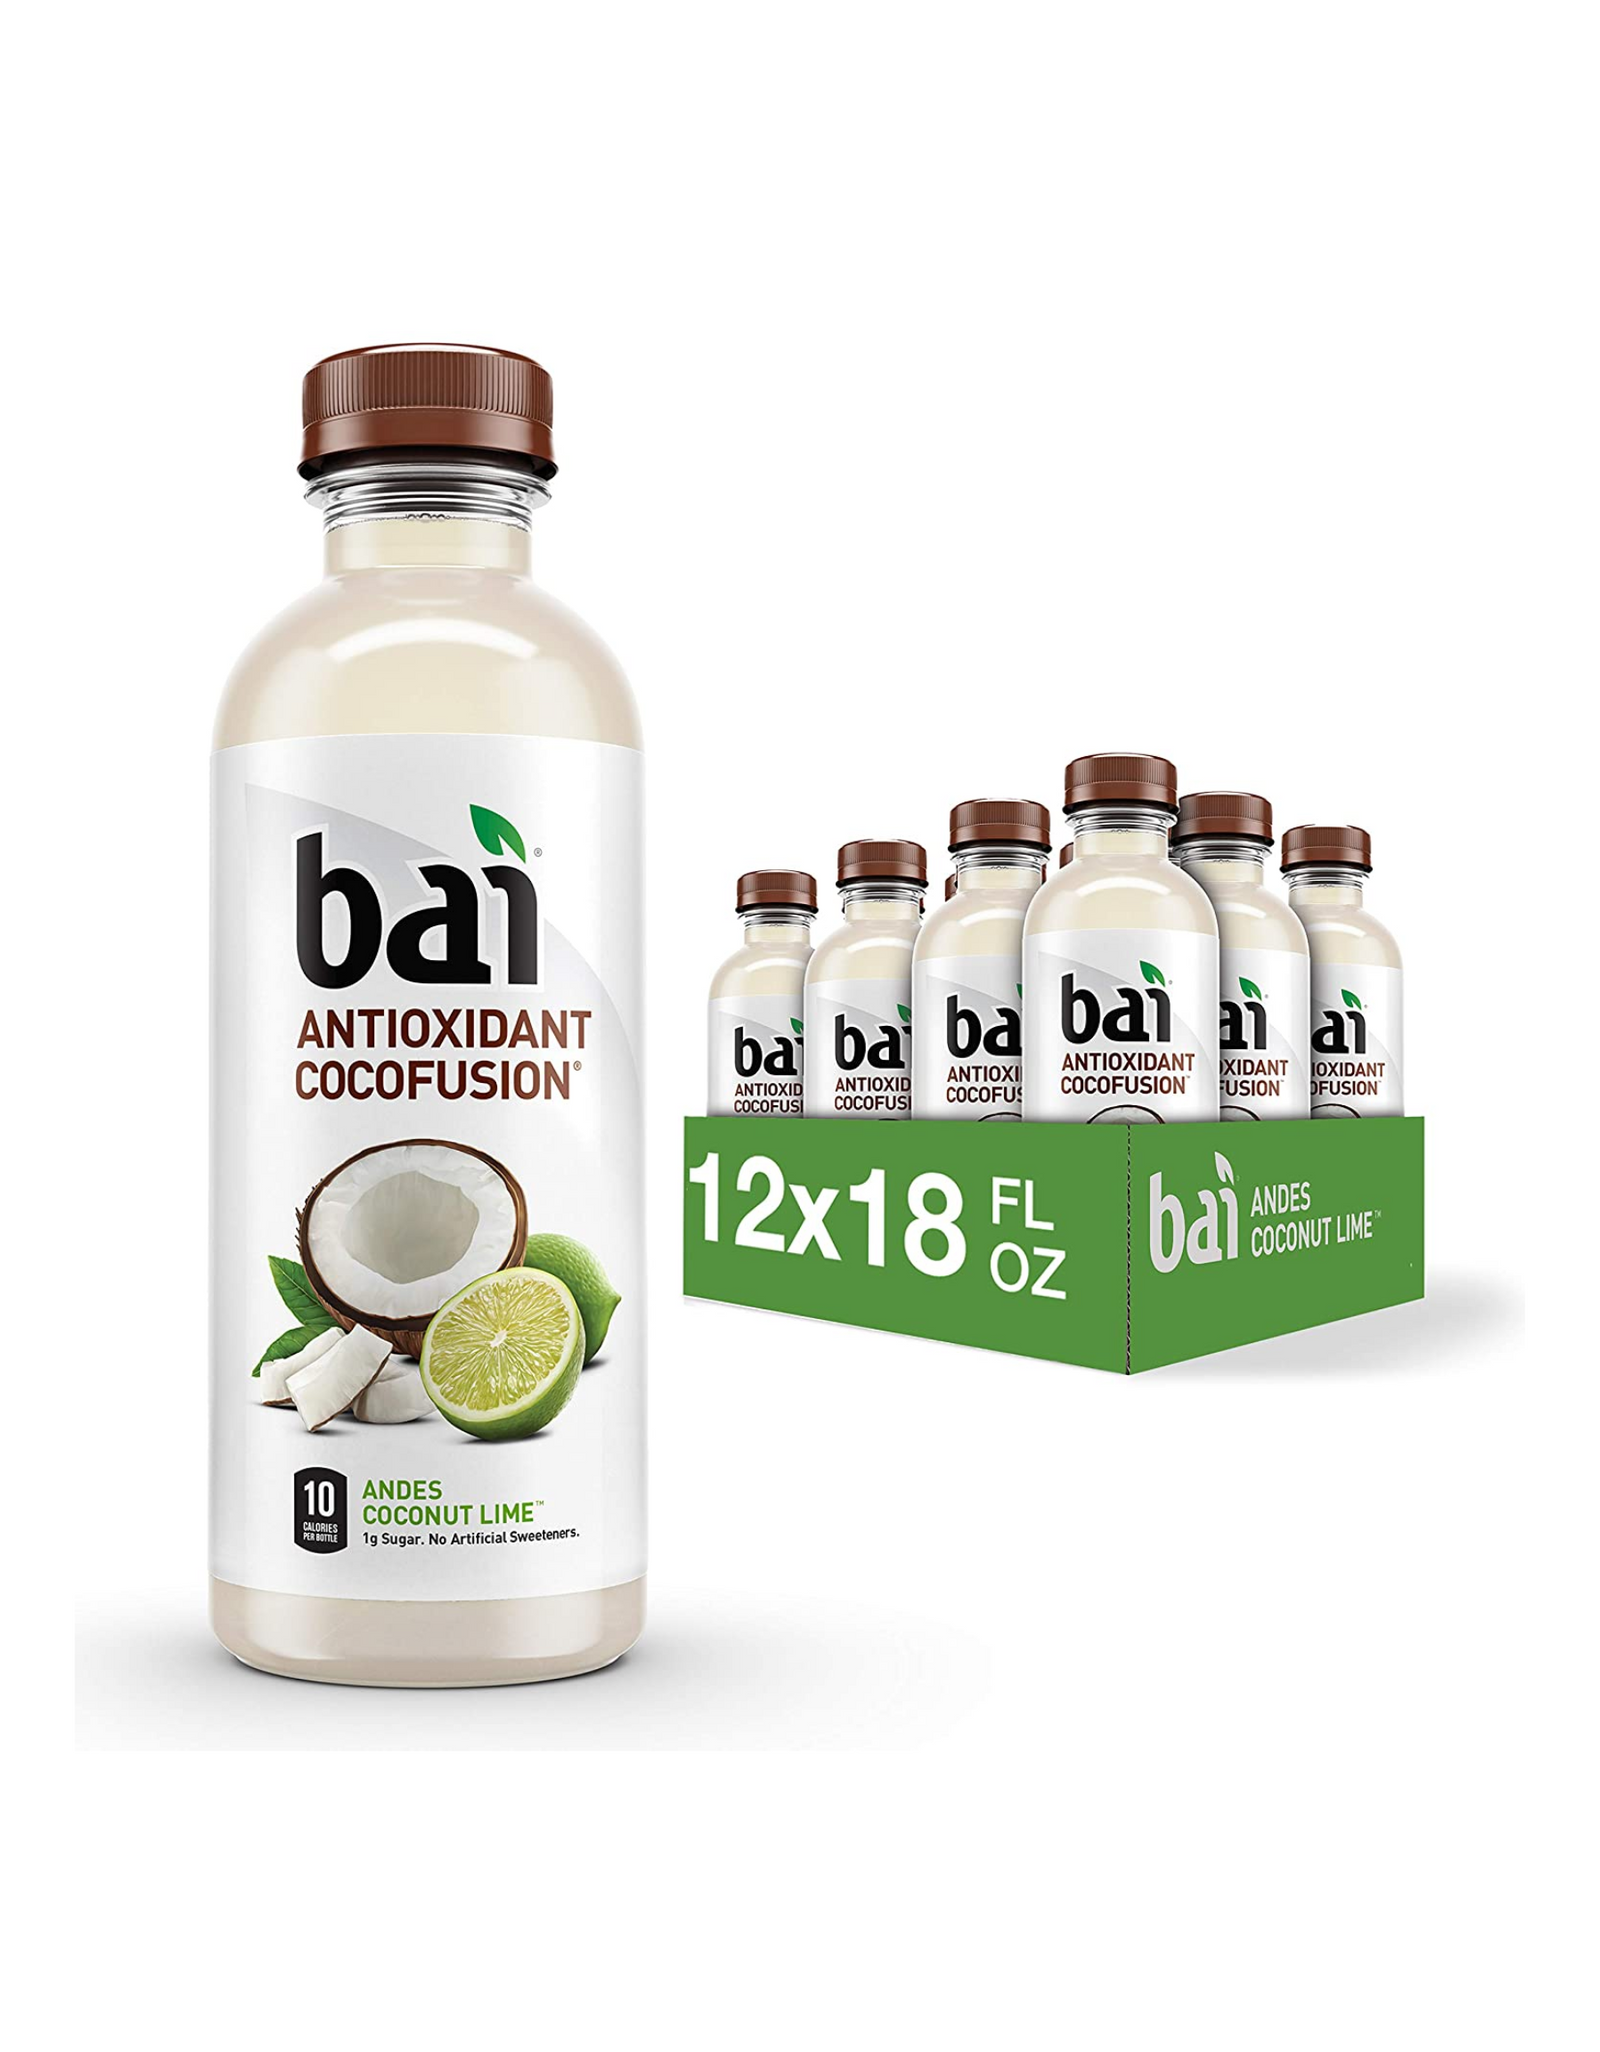 Bai Coconut Flavored Water, Antioxidant Cocofusion, Andes Coconut Lime, 18 fl oz (Pack of 12)